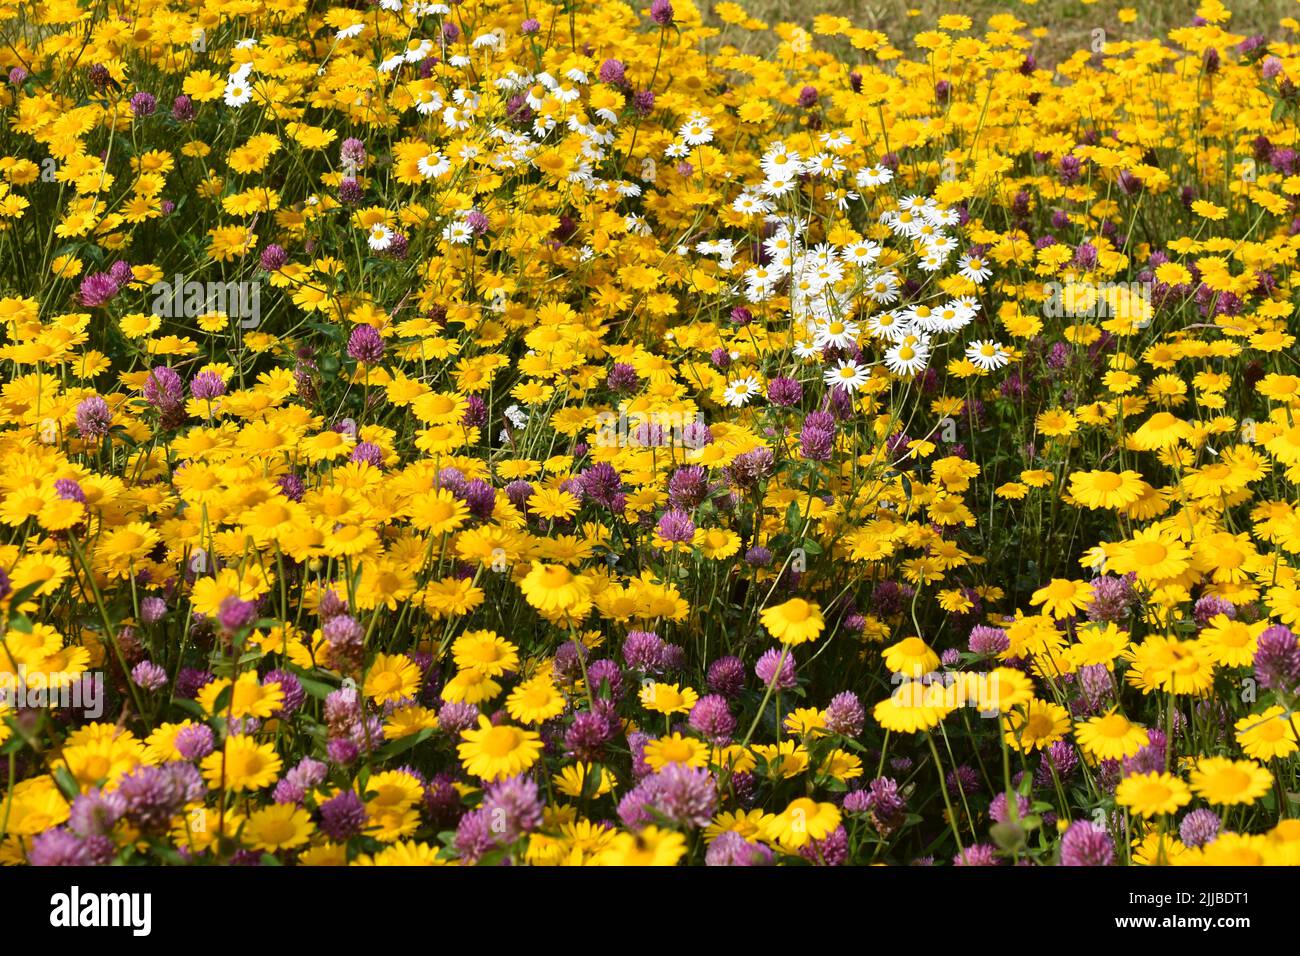 Big field of golden marguerite Anthemis tinctoria with red clover and daisies in between Stock Photo